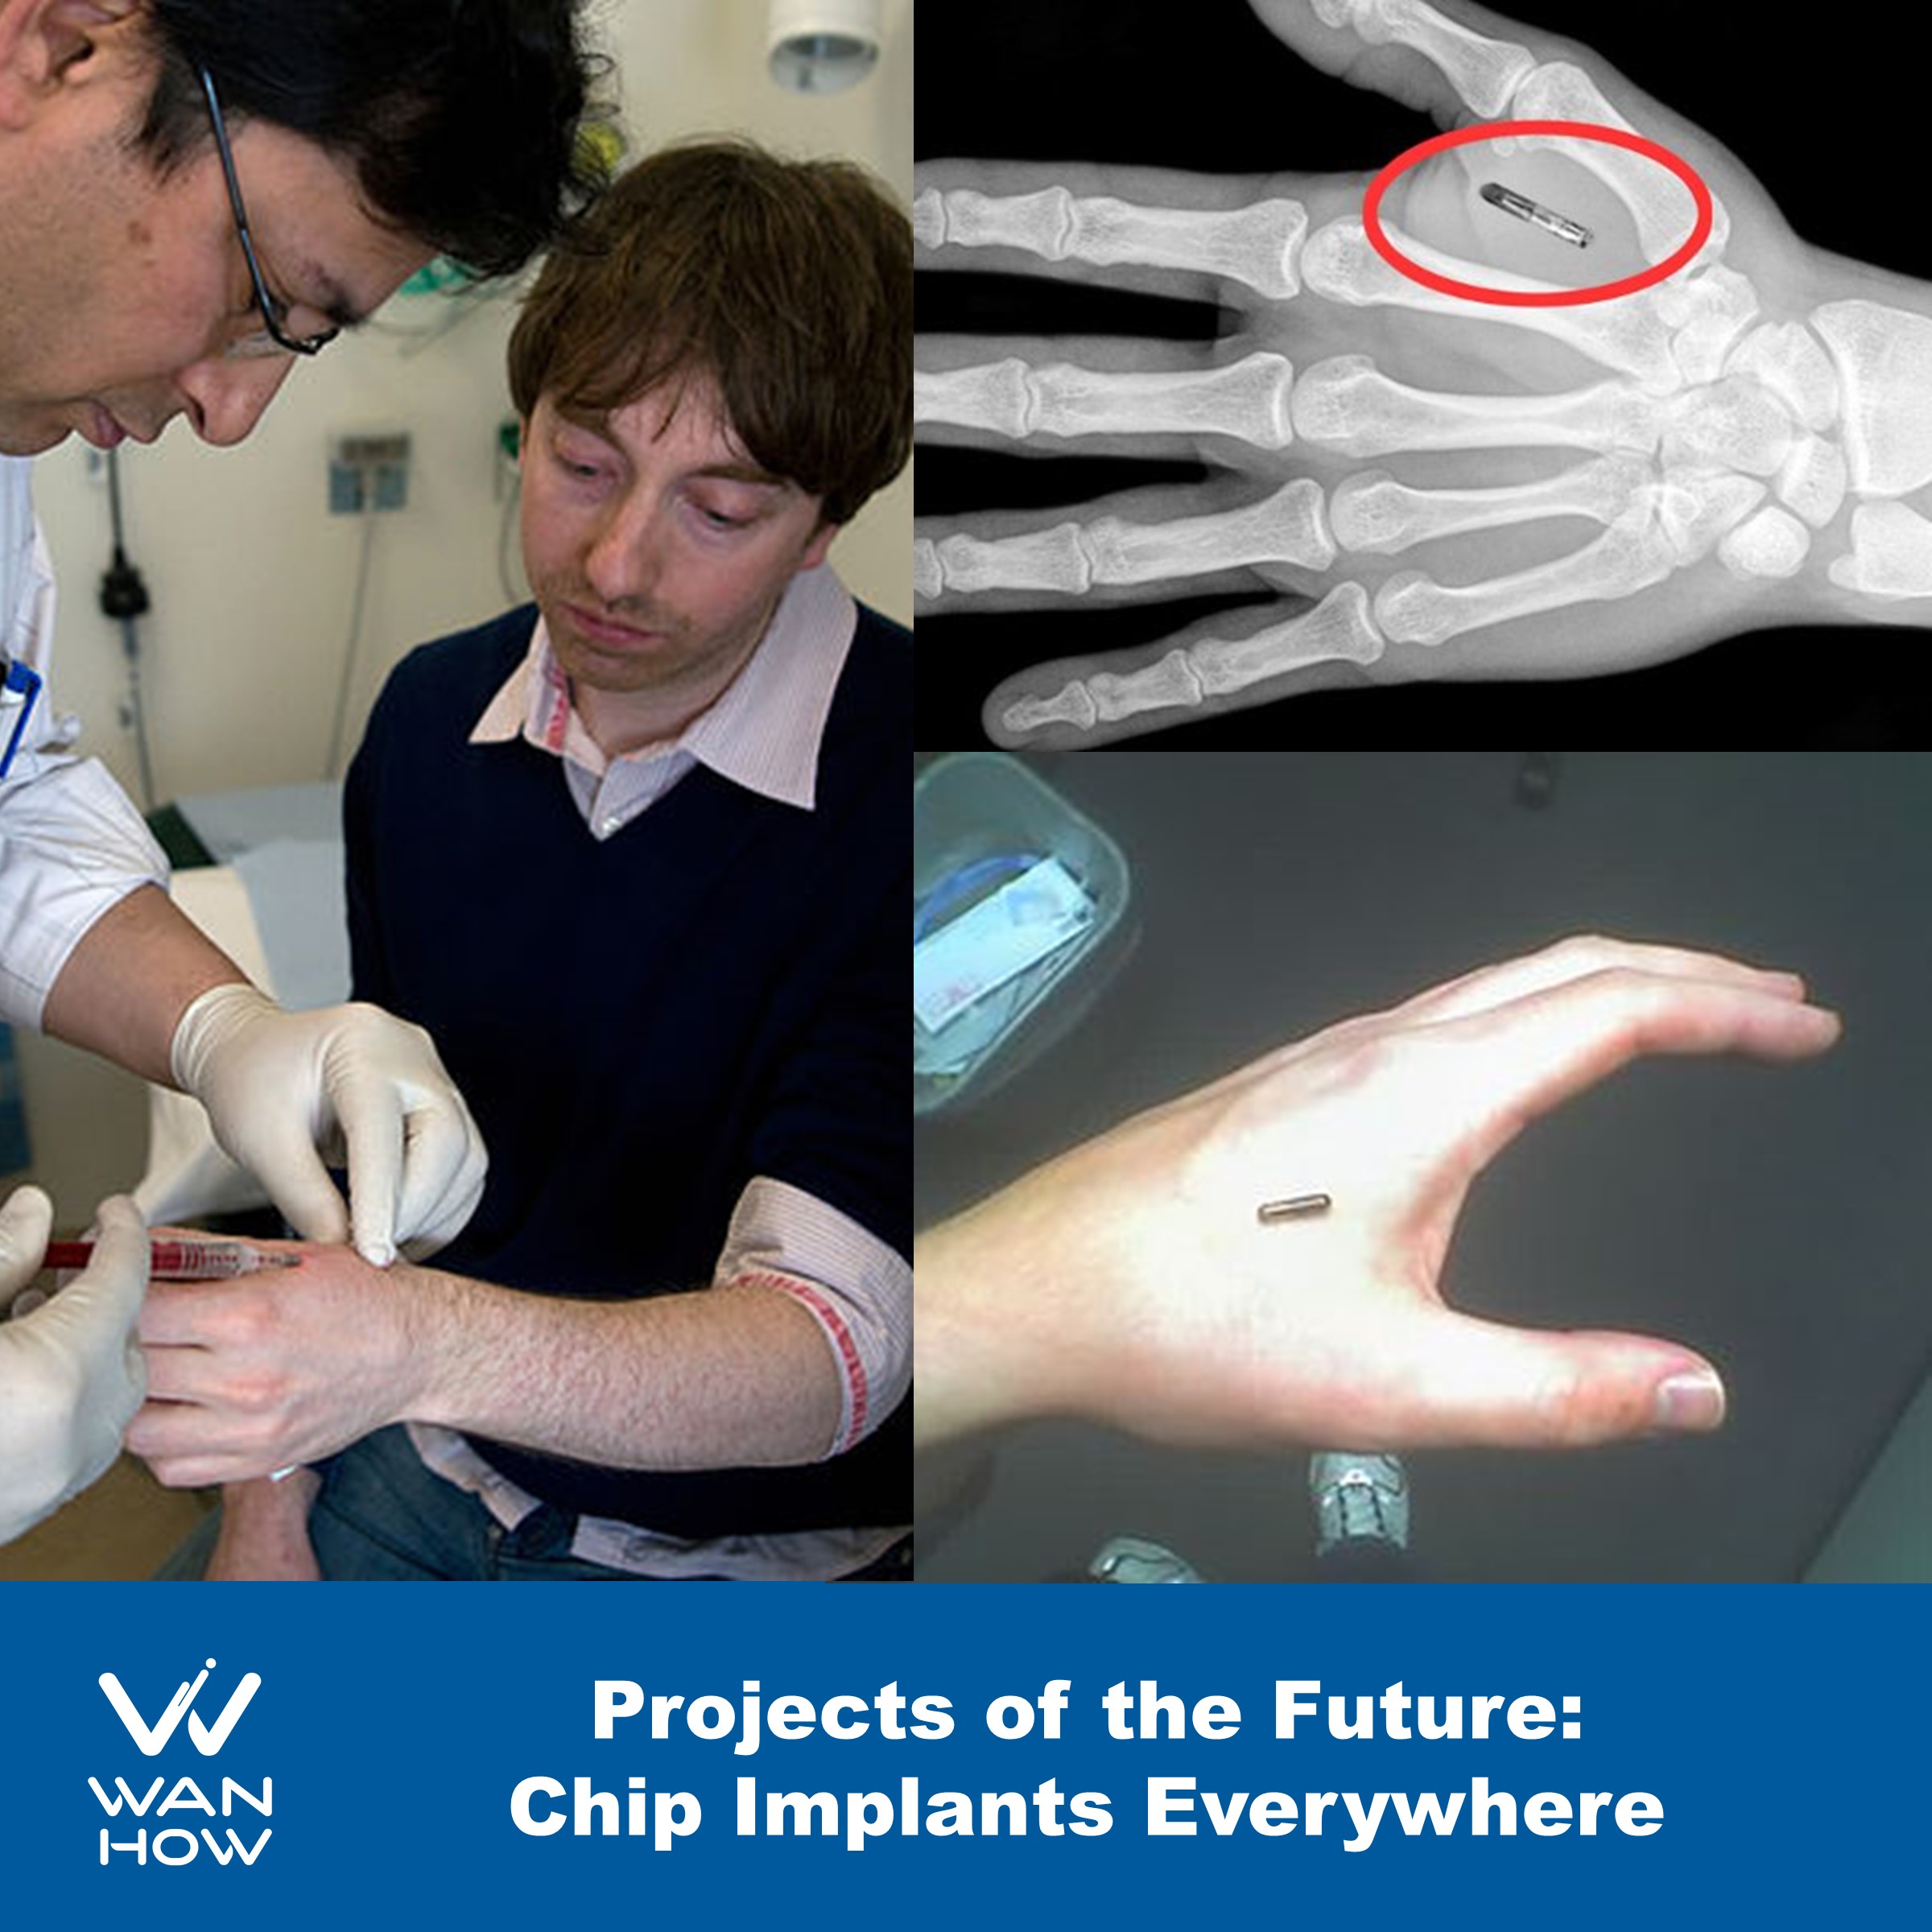 Projects of the Future: Chip Implants Everywhere